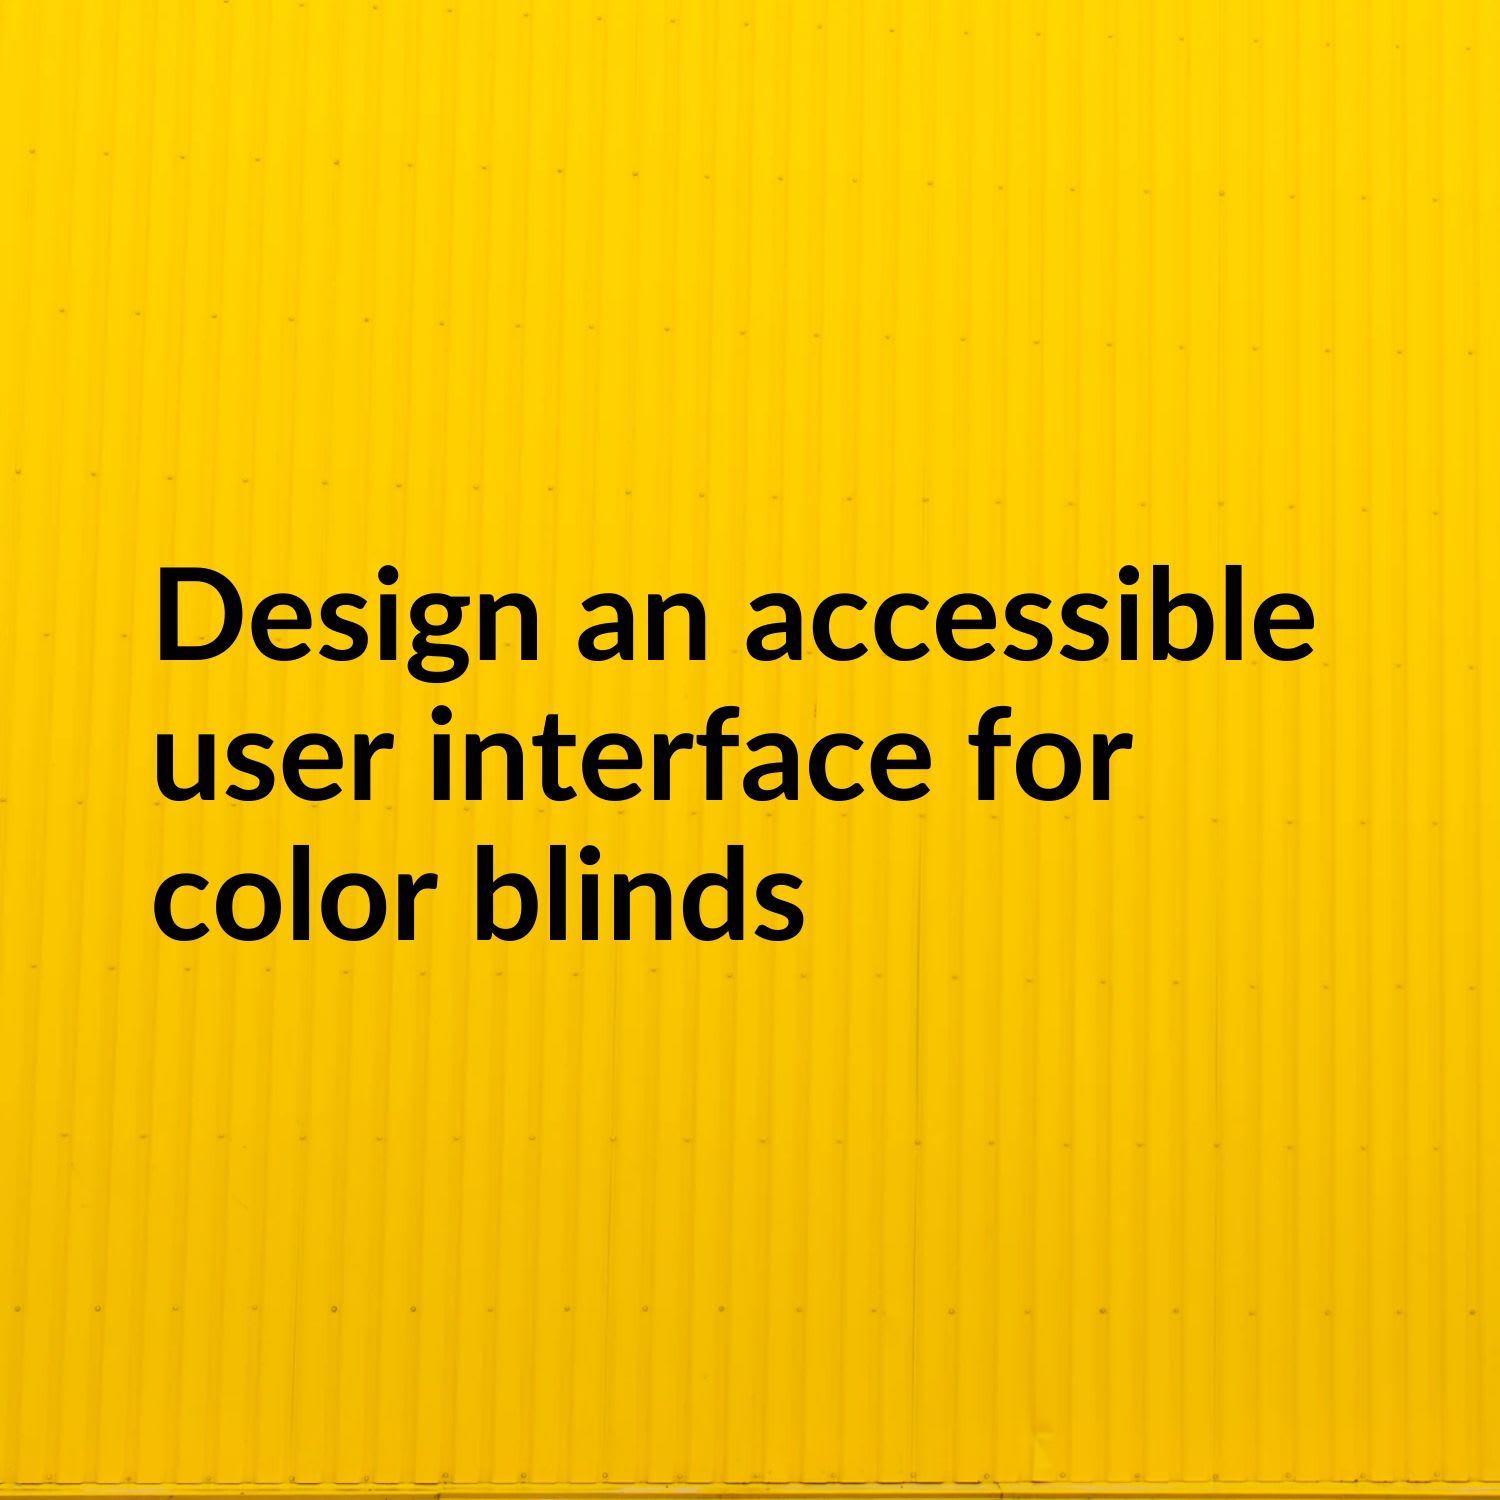 Design an accessible user interface for color blinds